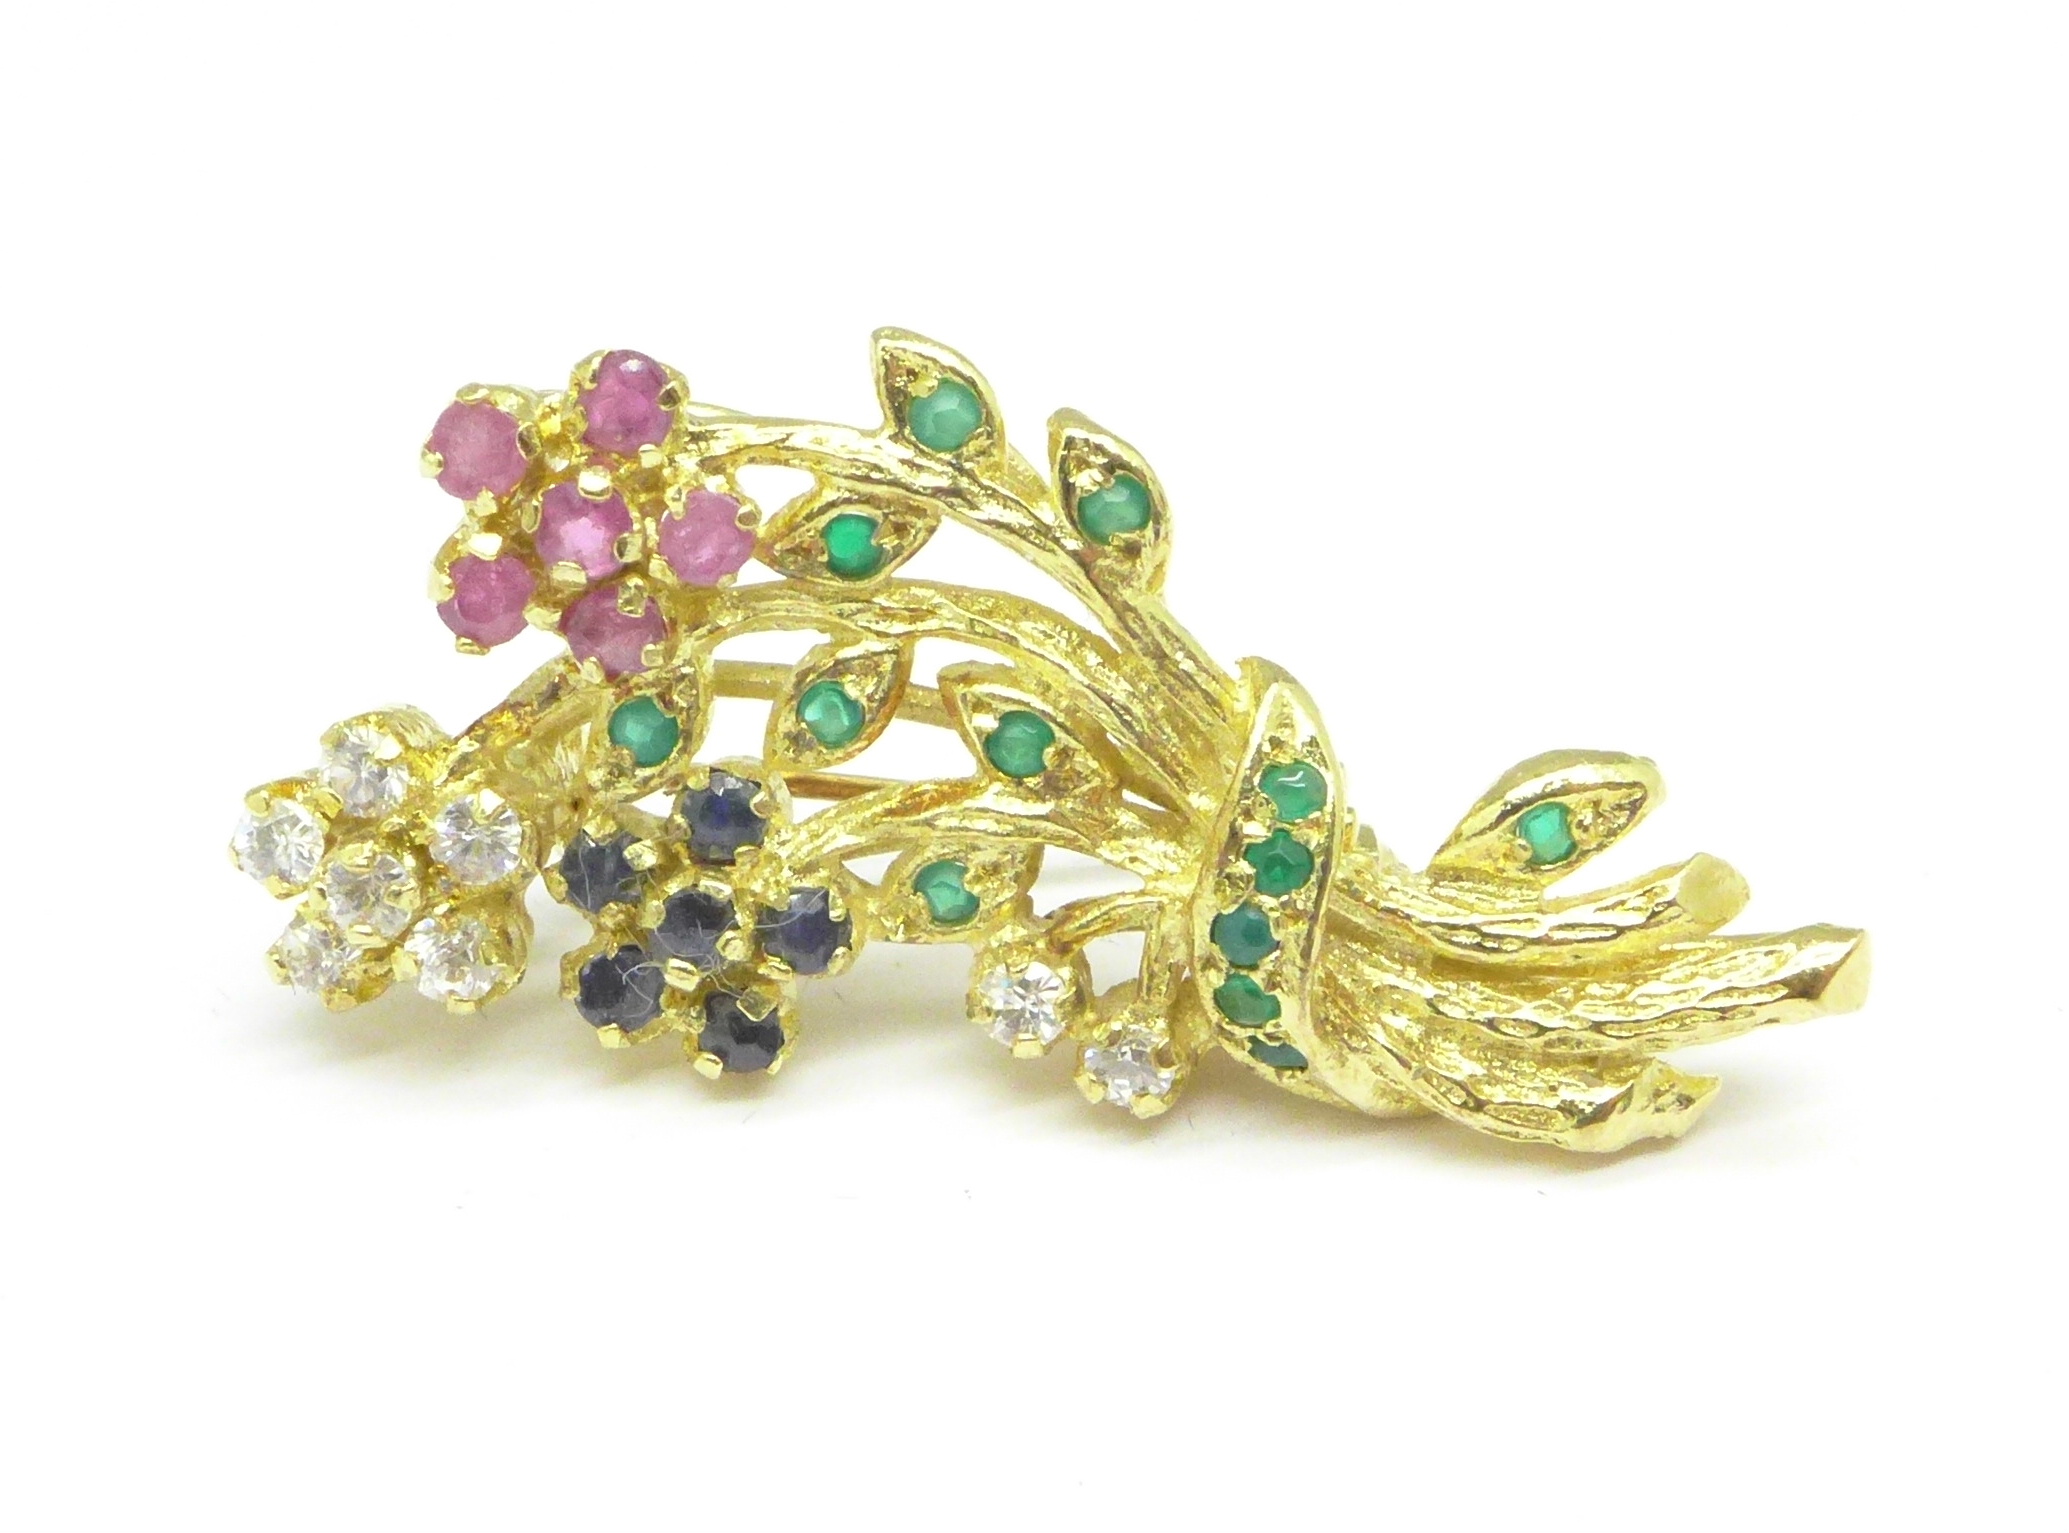 A silver gilt brooch set with rubies, emeralds,